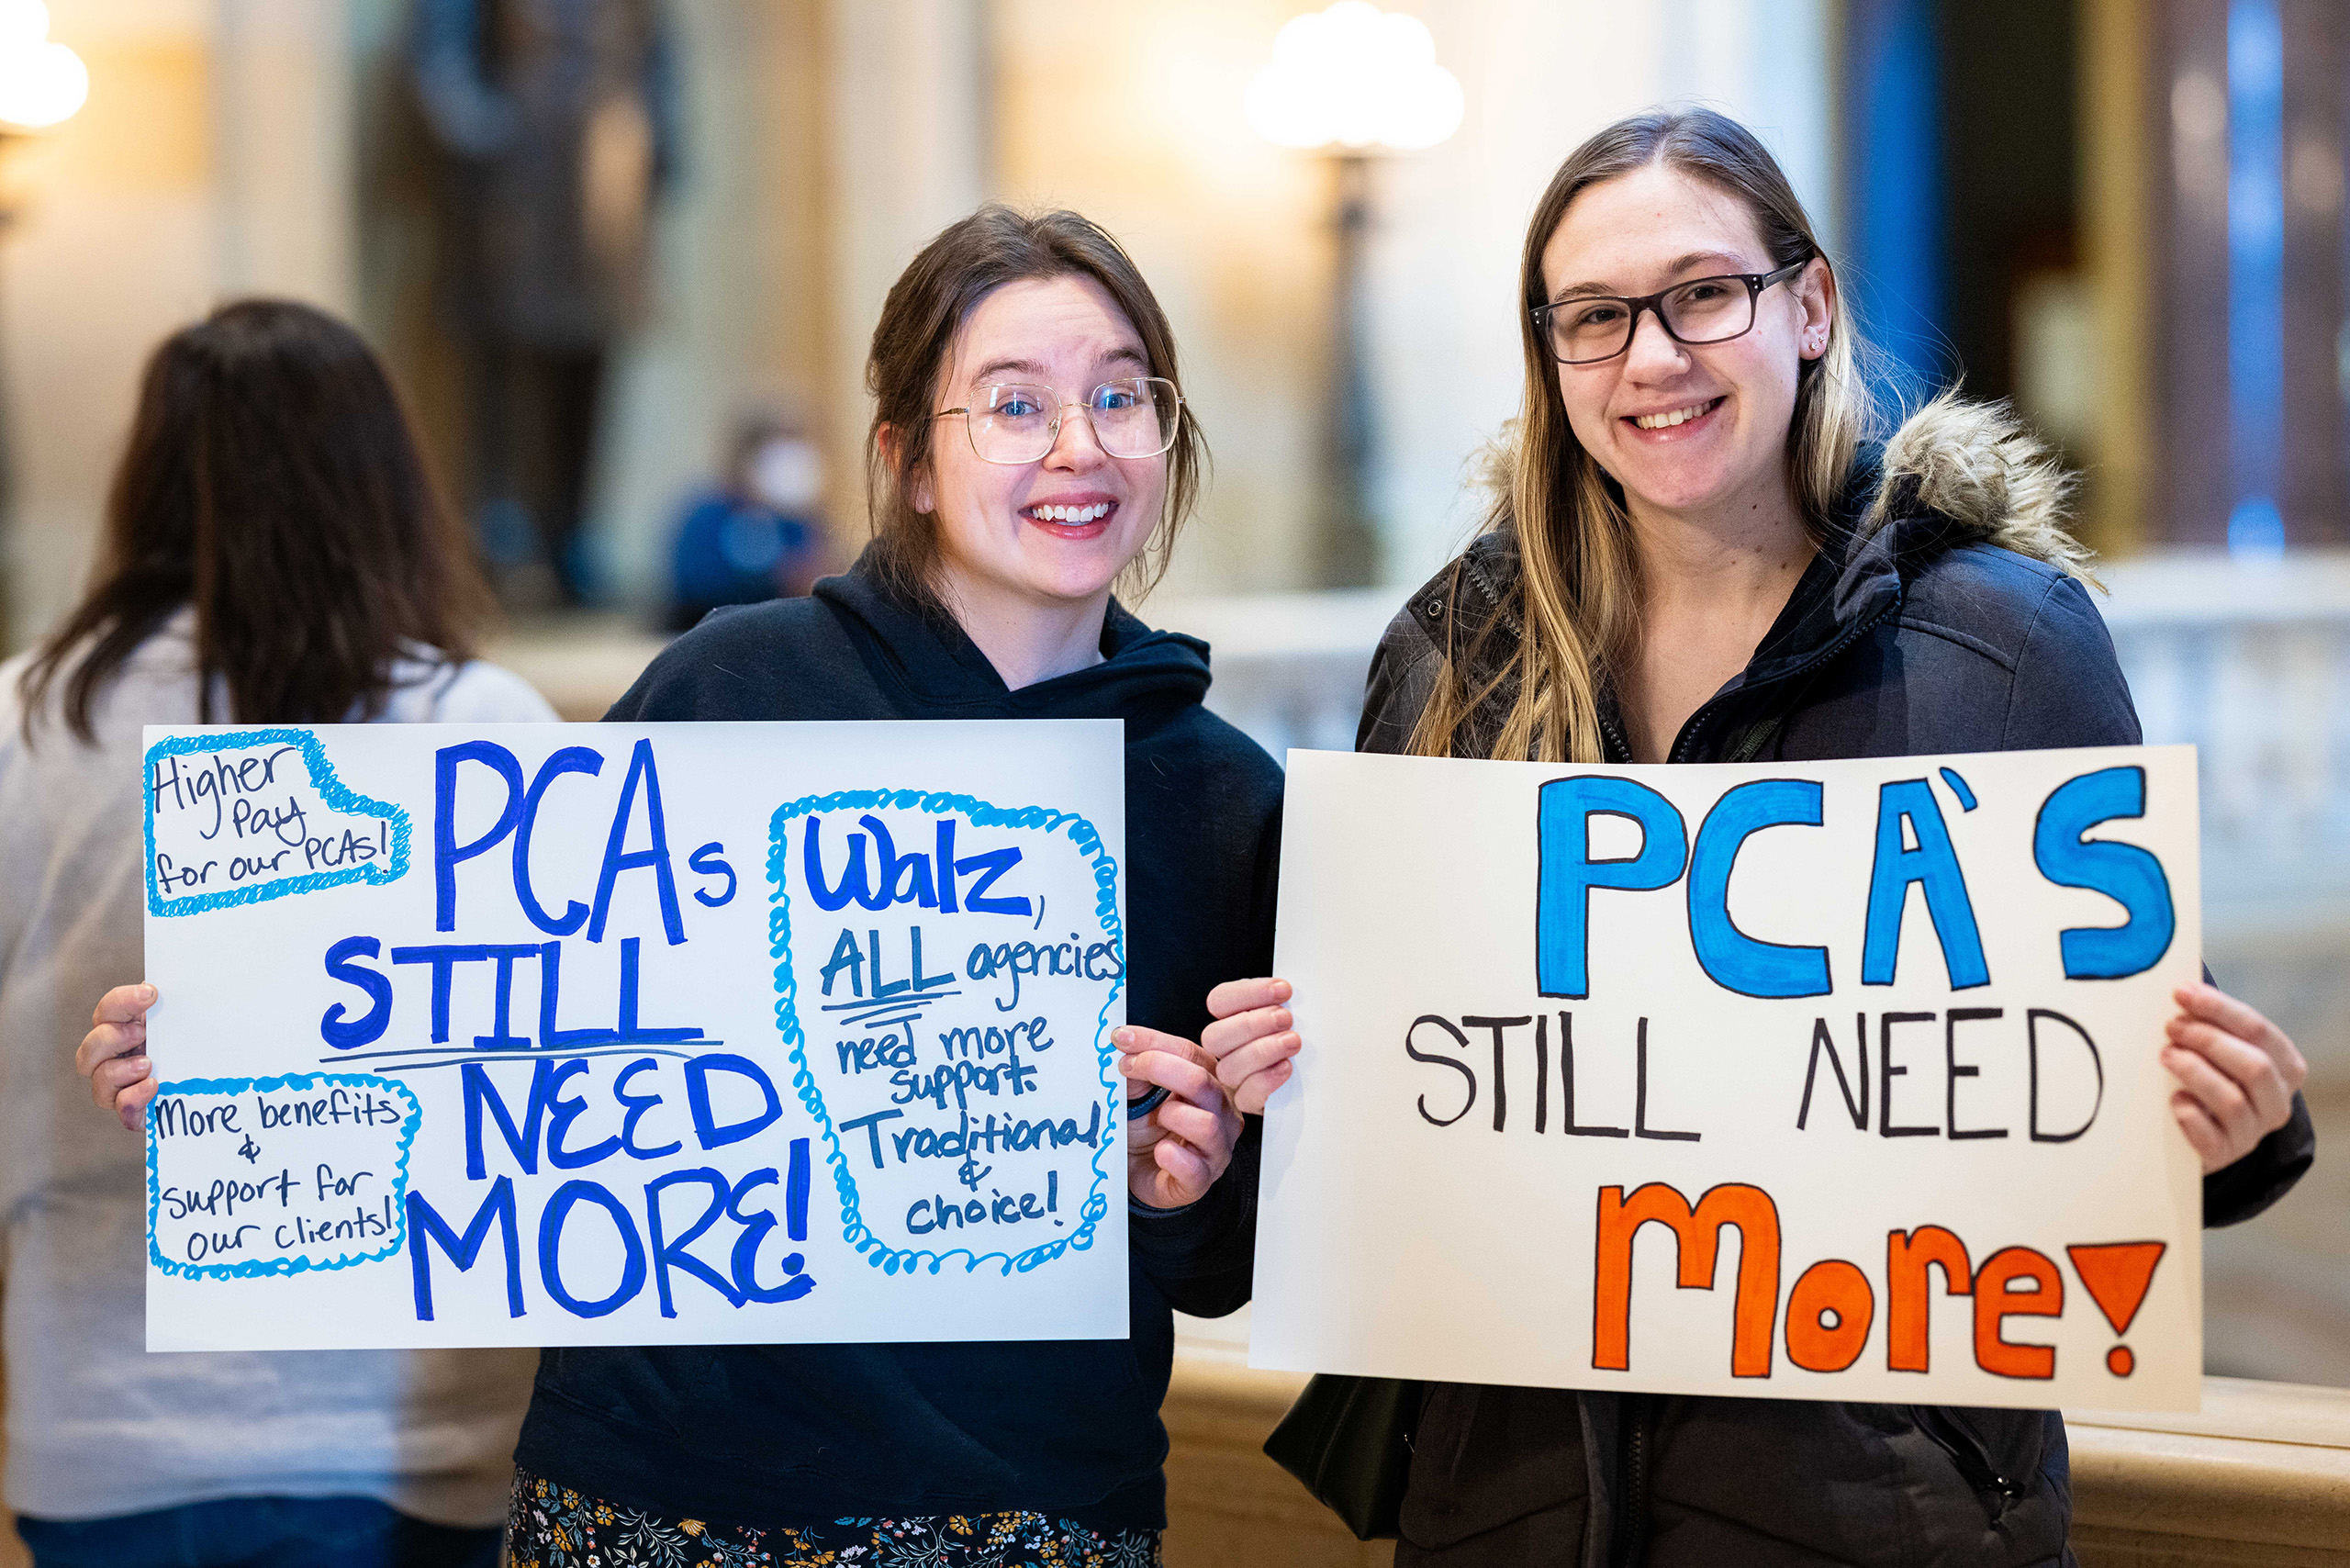 Two young women holding signs that read, "PCAs Still Need More!"